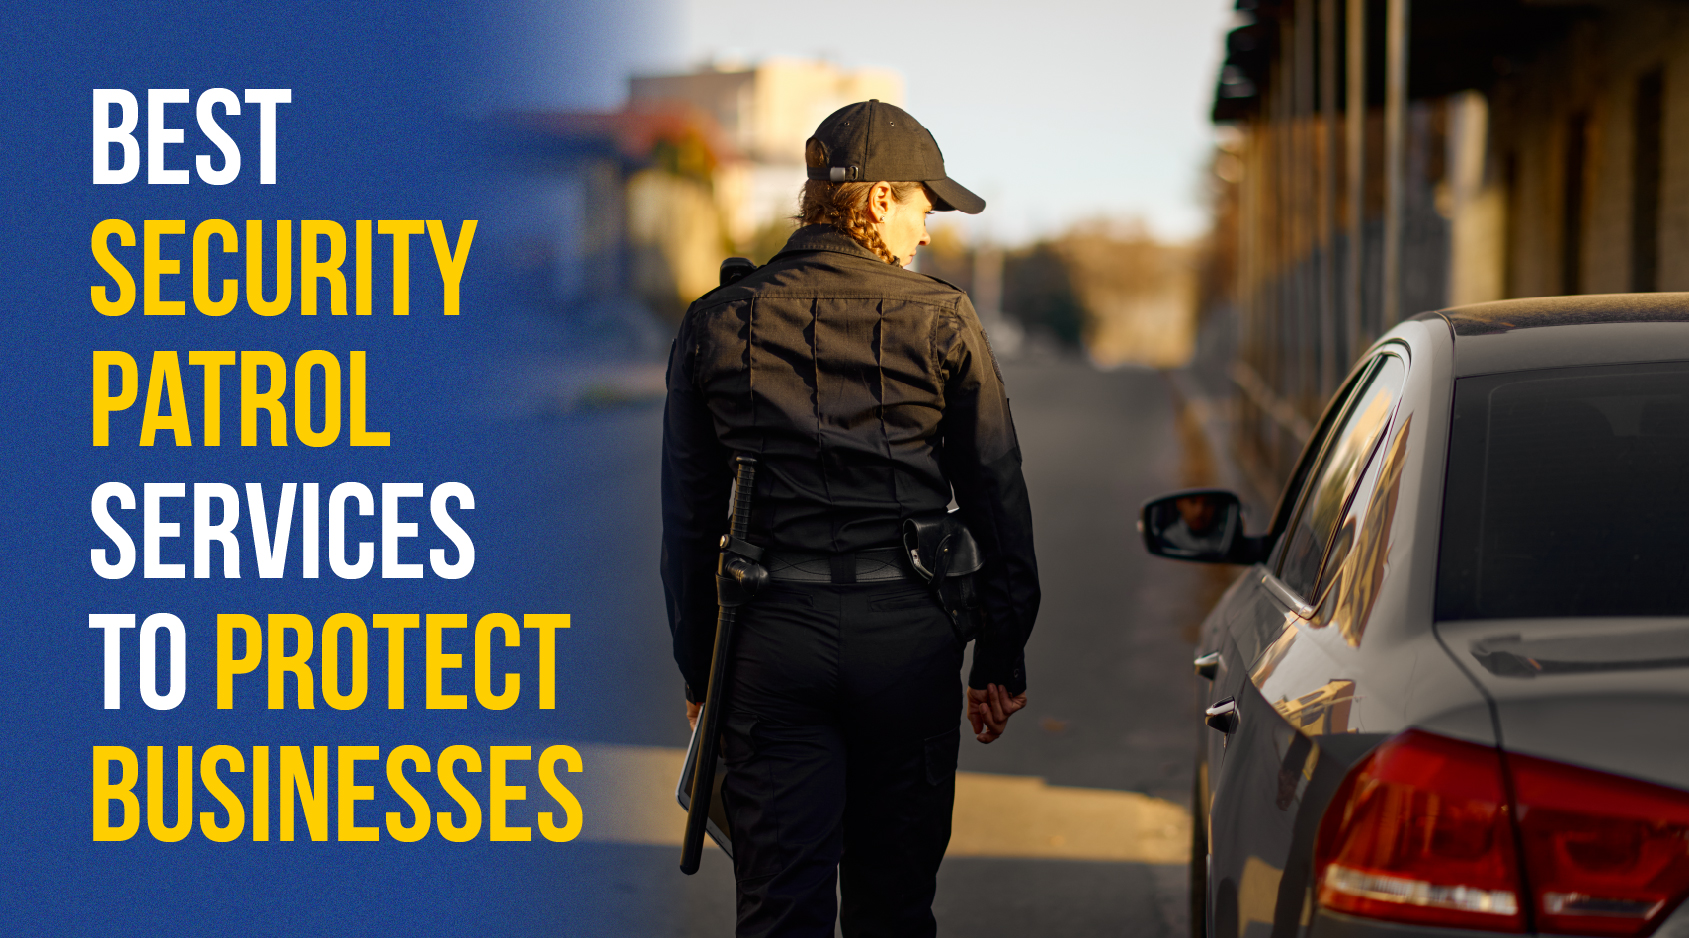 Best security patrol services to protect business